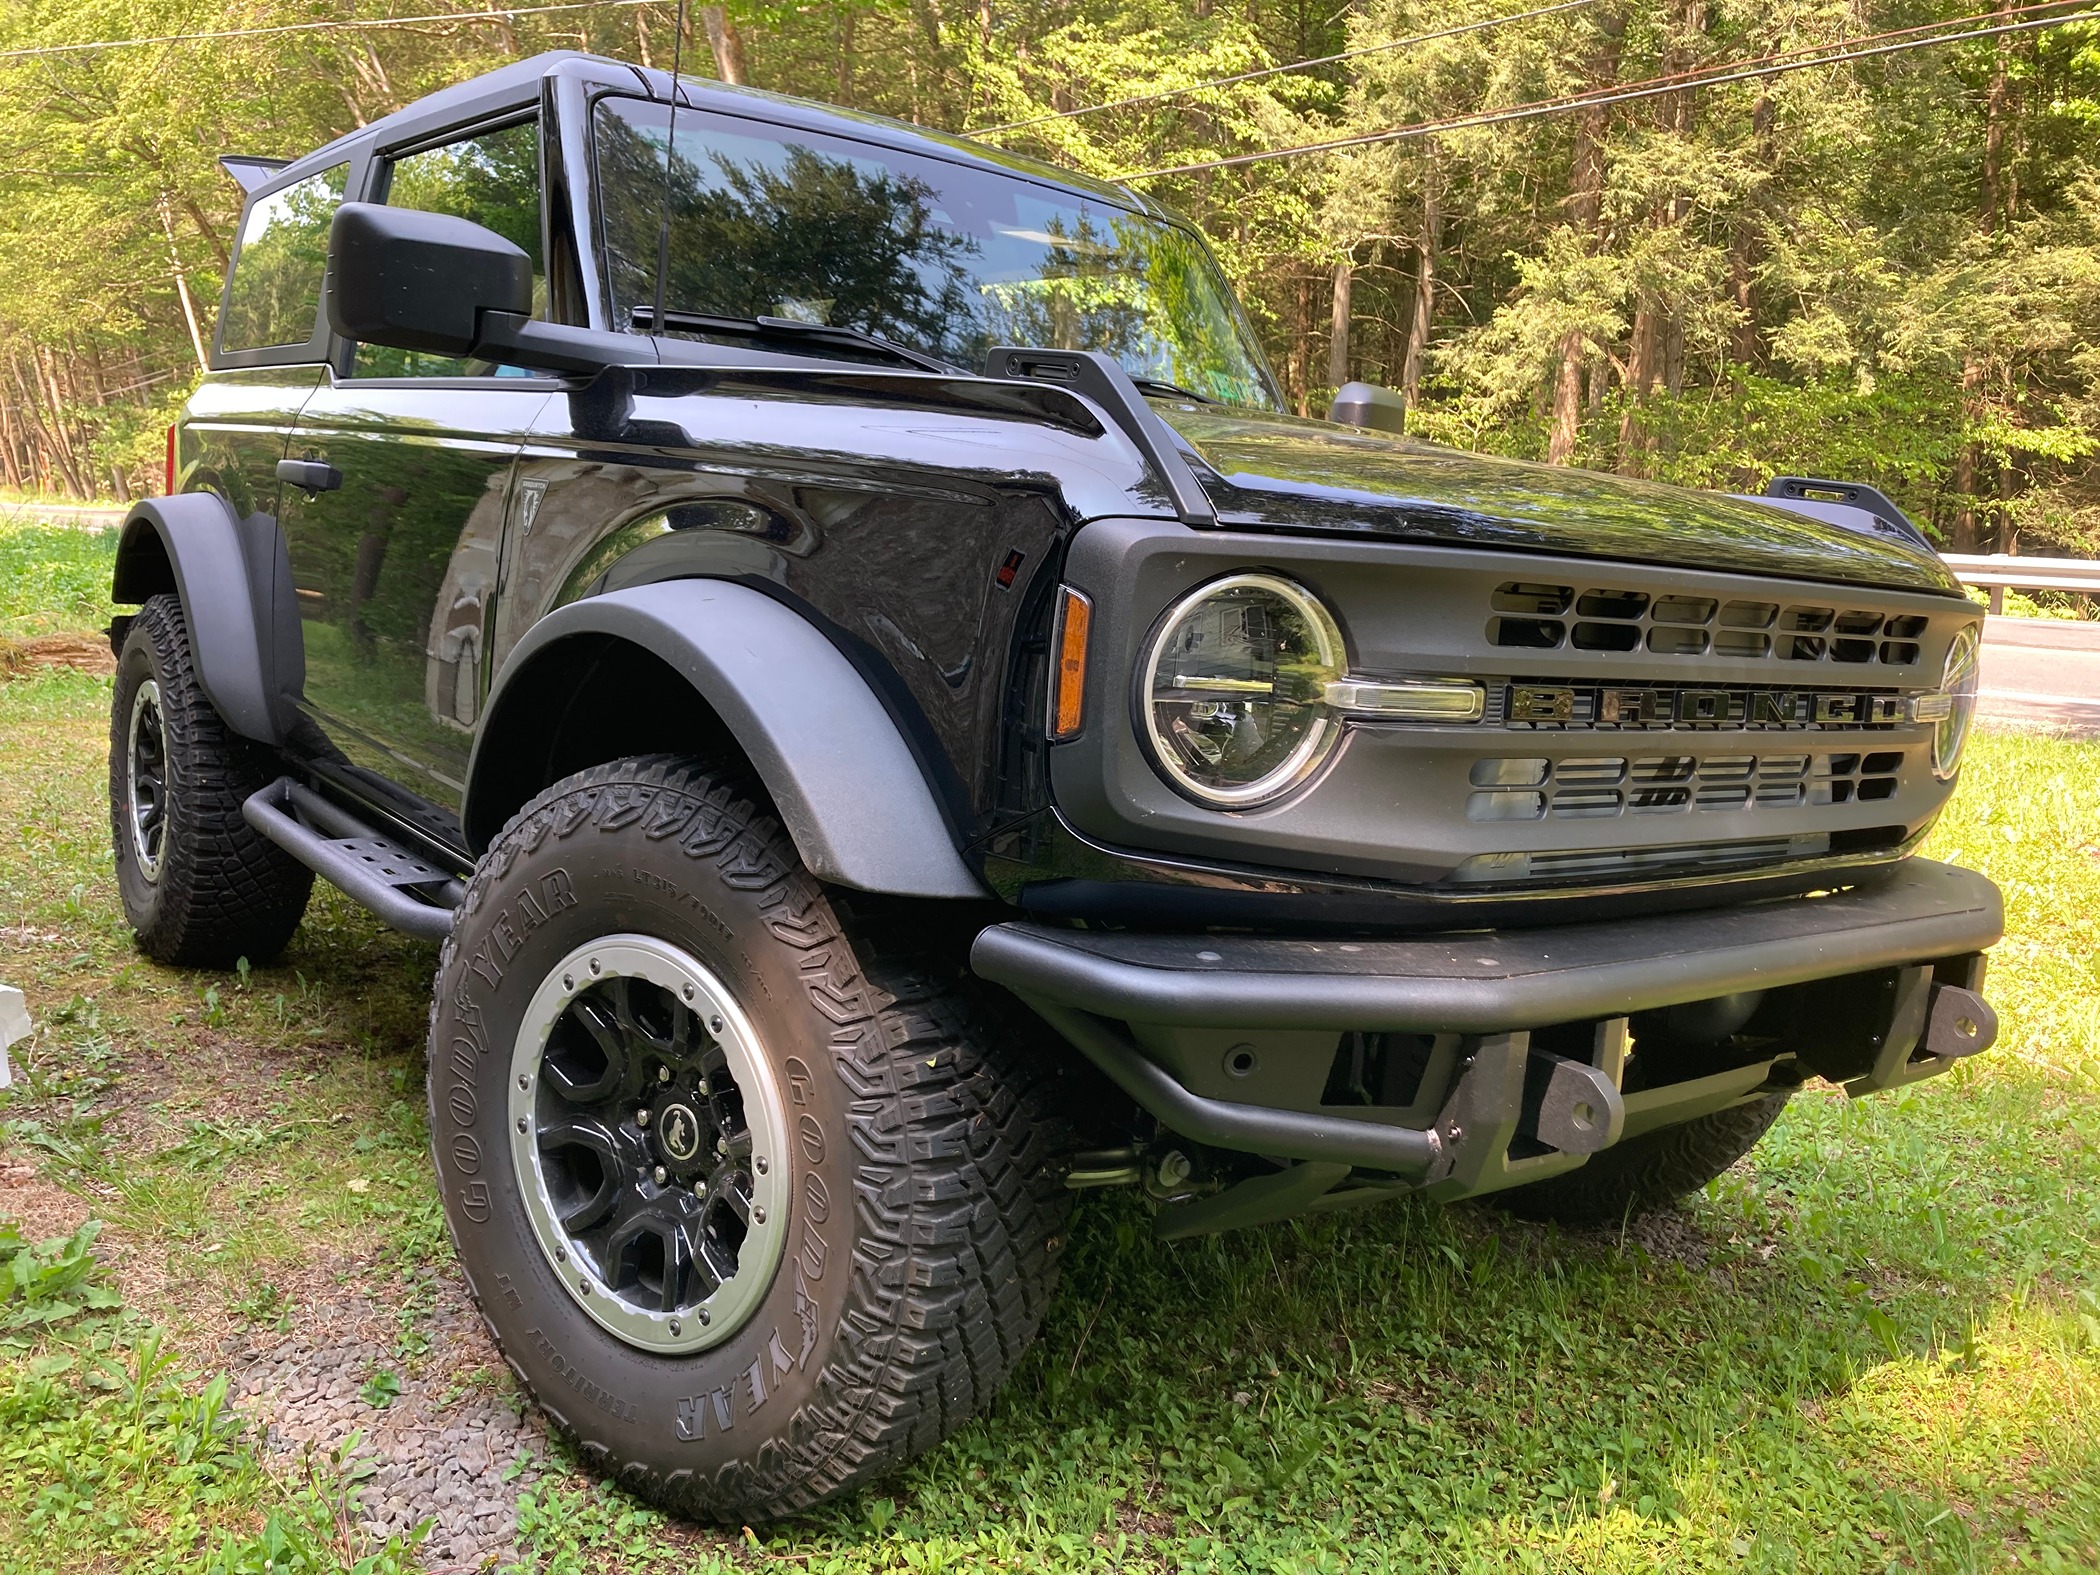 Ford Bronco Front End Friday! Show off your Bronco! IMG_0719.JPG